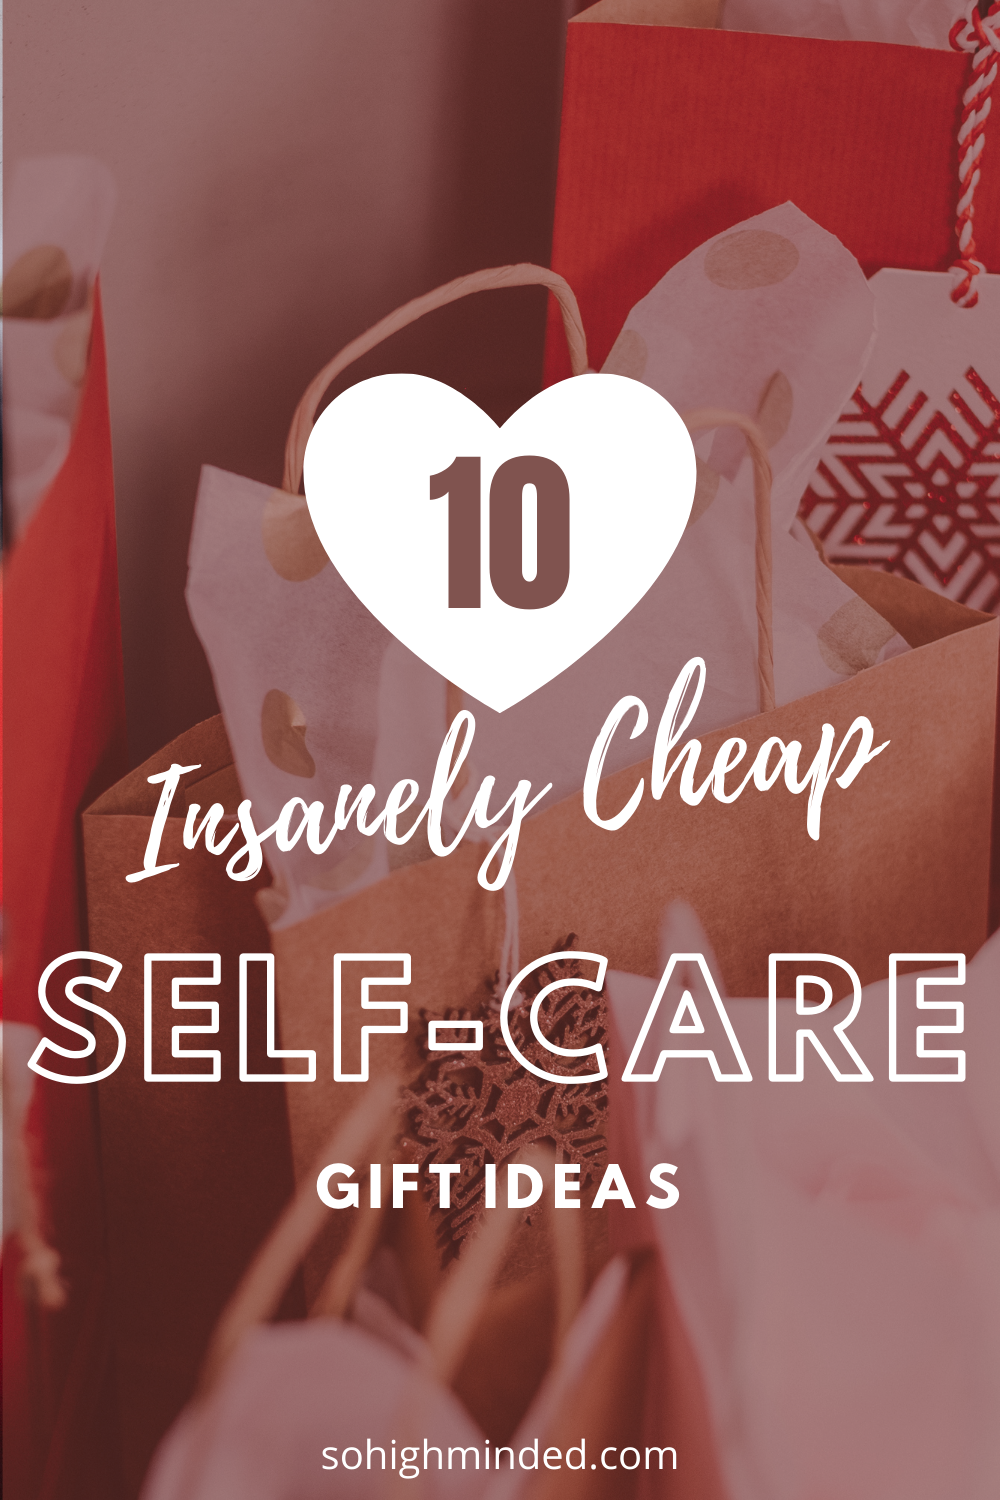 10 Insanely Cheap Self-Care Gift Ideas - Self Care Gifts So High-Minded